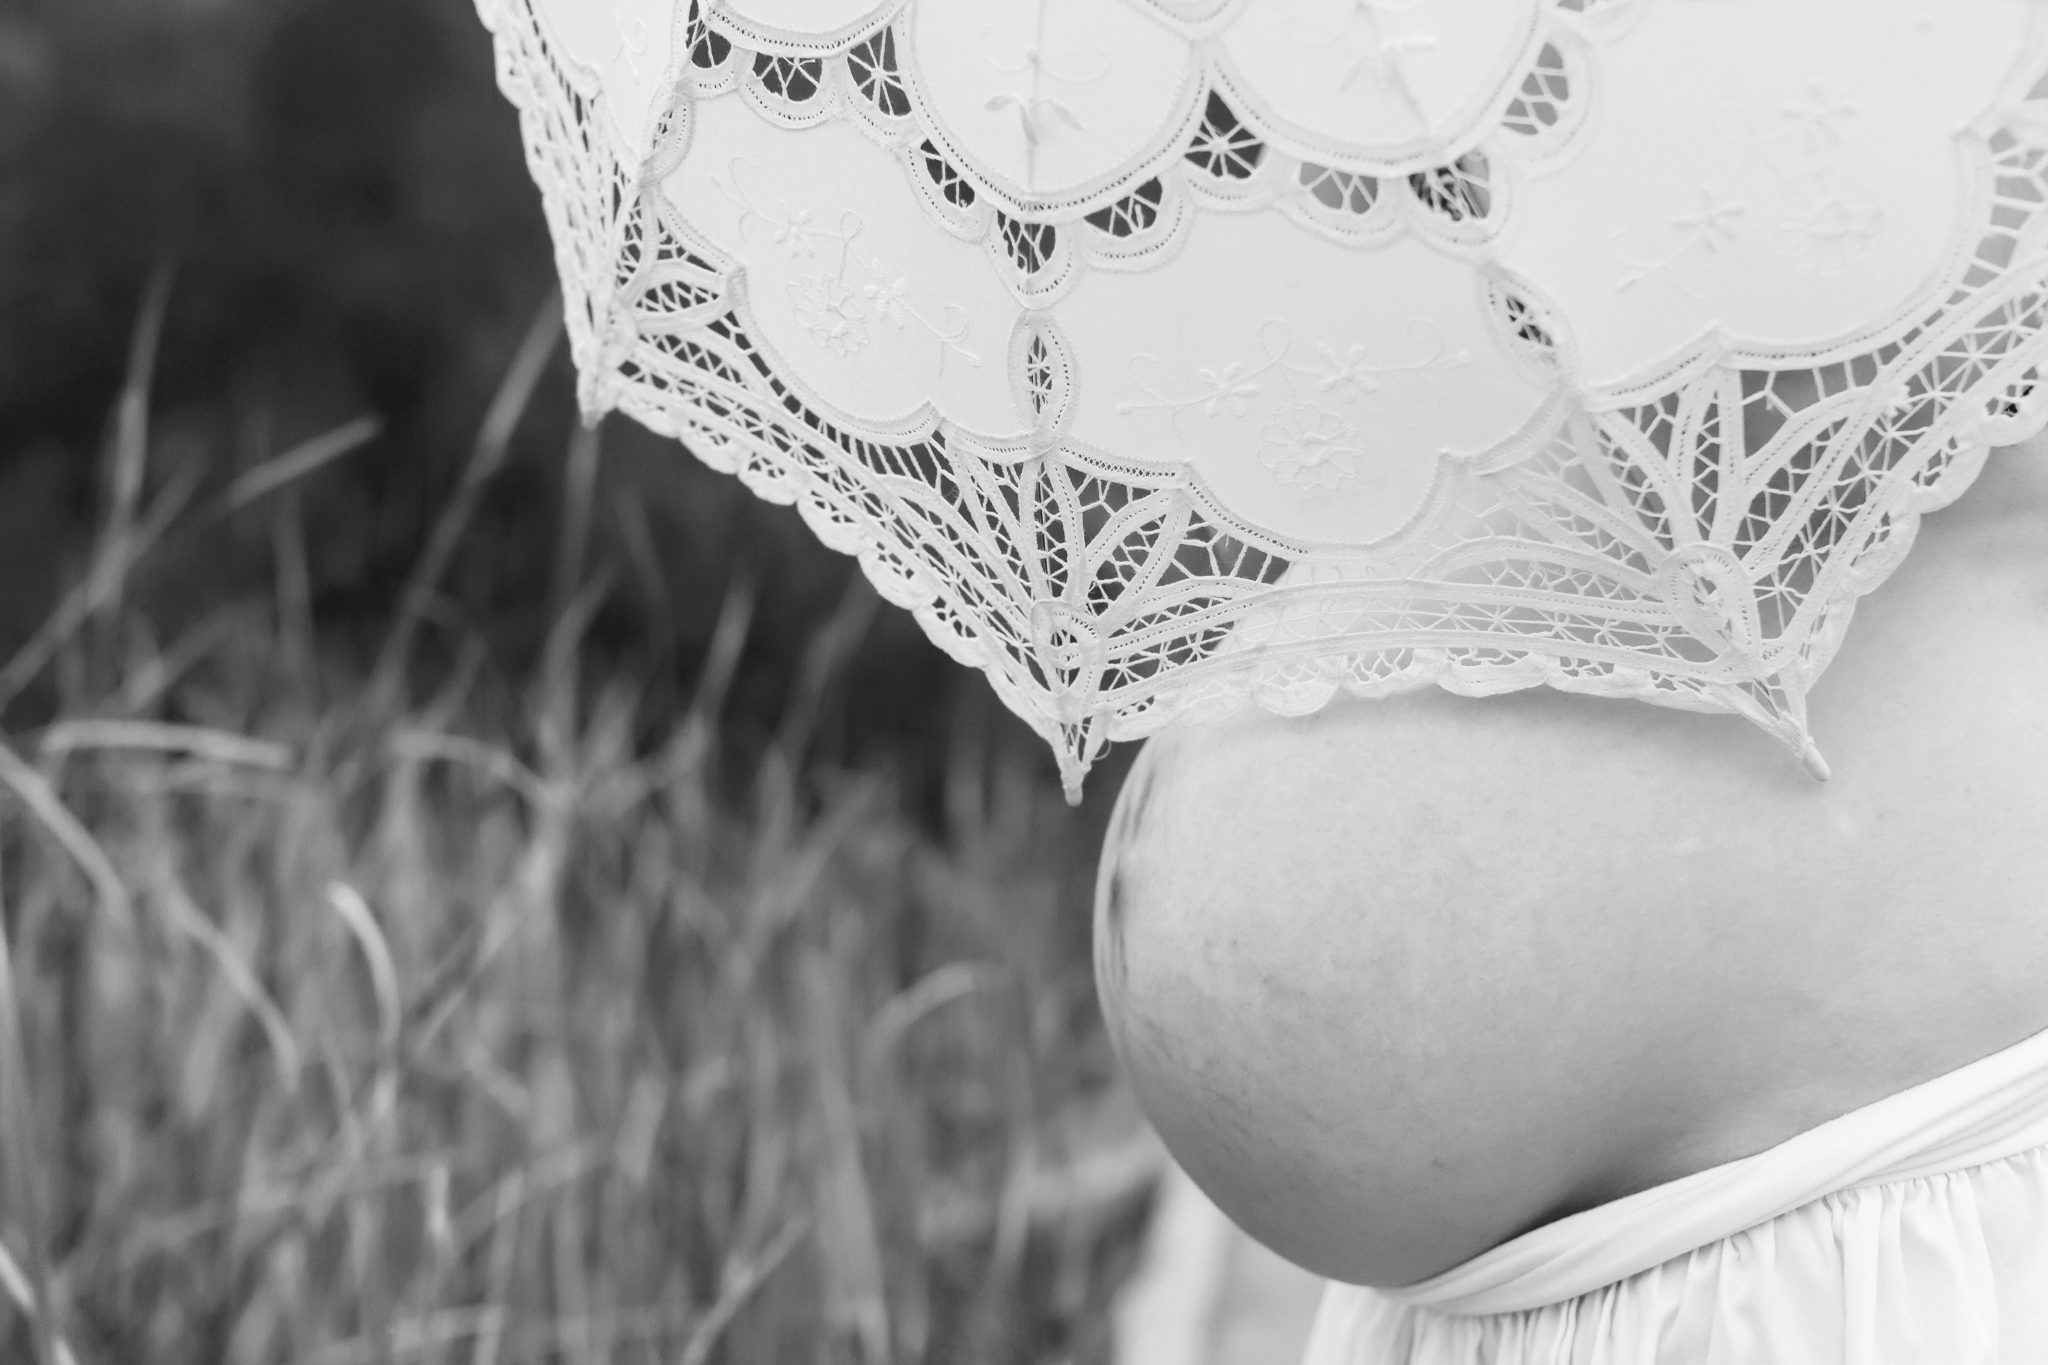 Expecting + Pretty in Pink | Austin Maternity Photographer